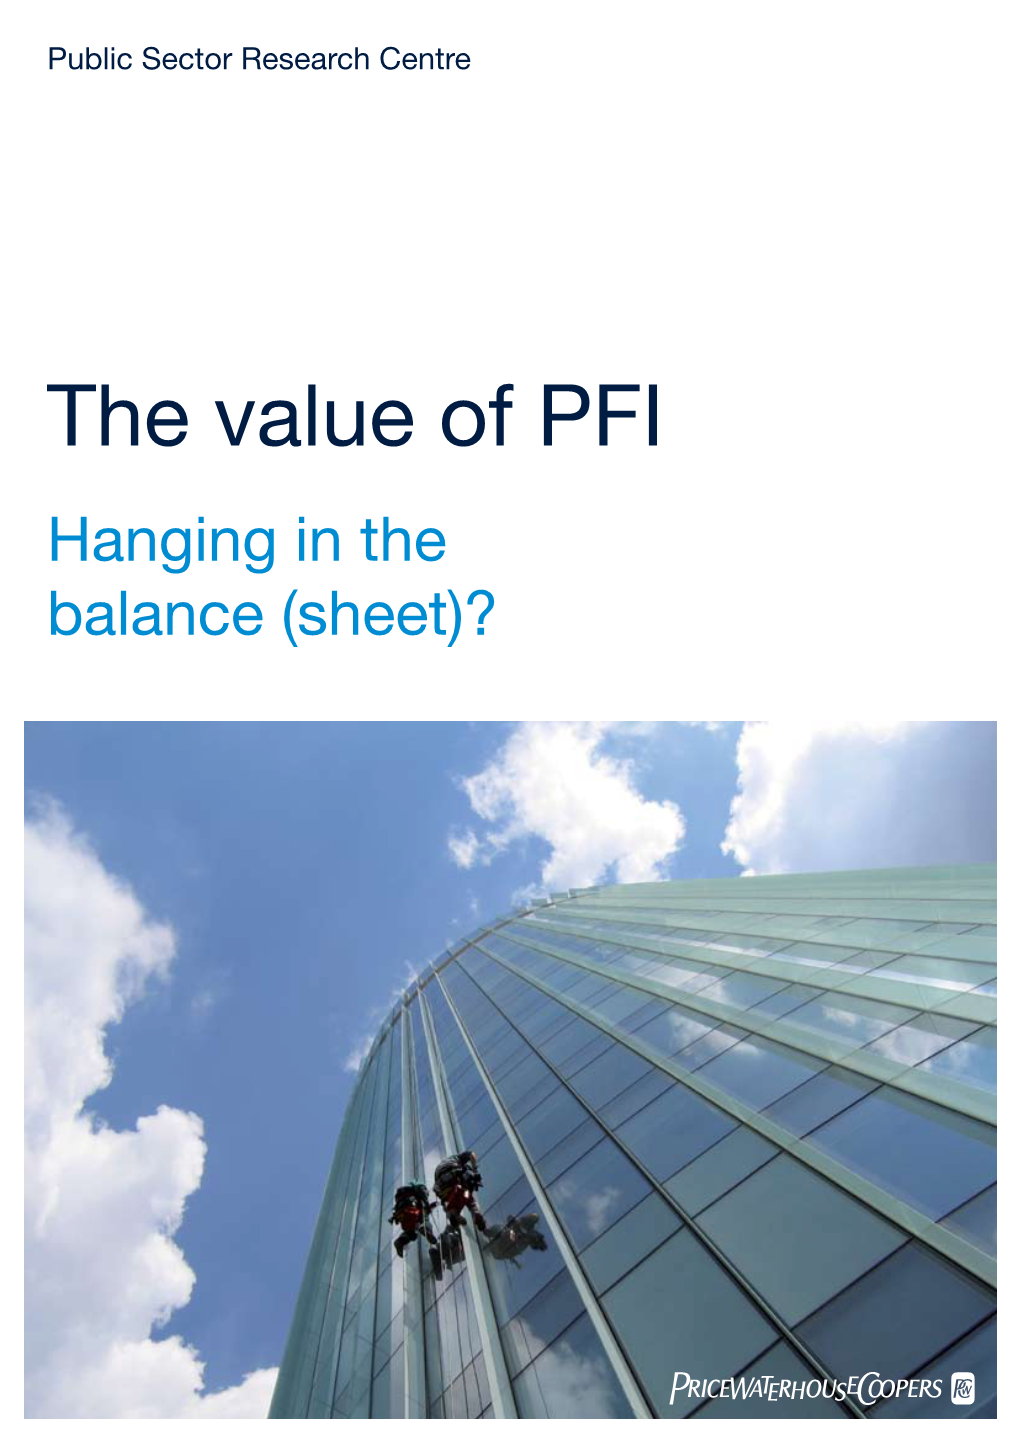 The Value of PFI Hanging in the Balance (Sheet)?